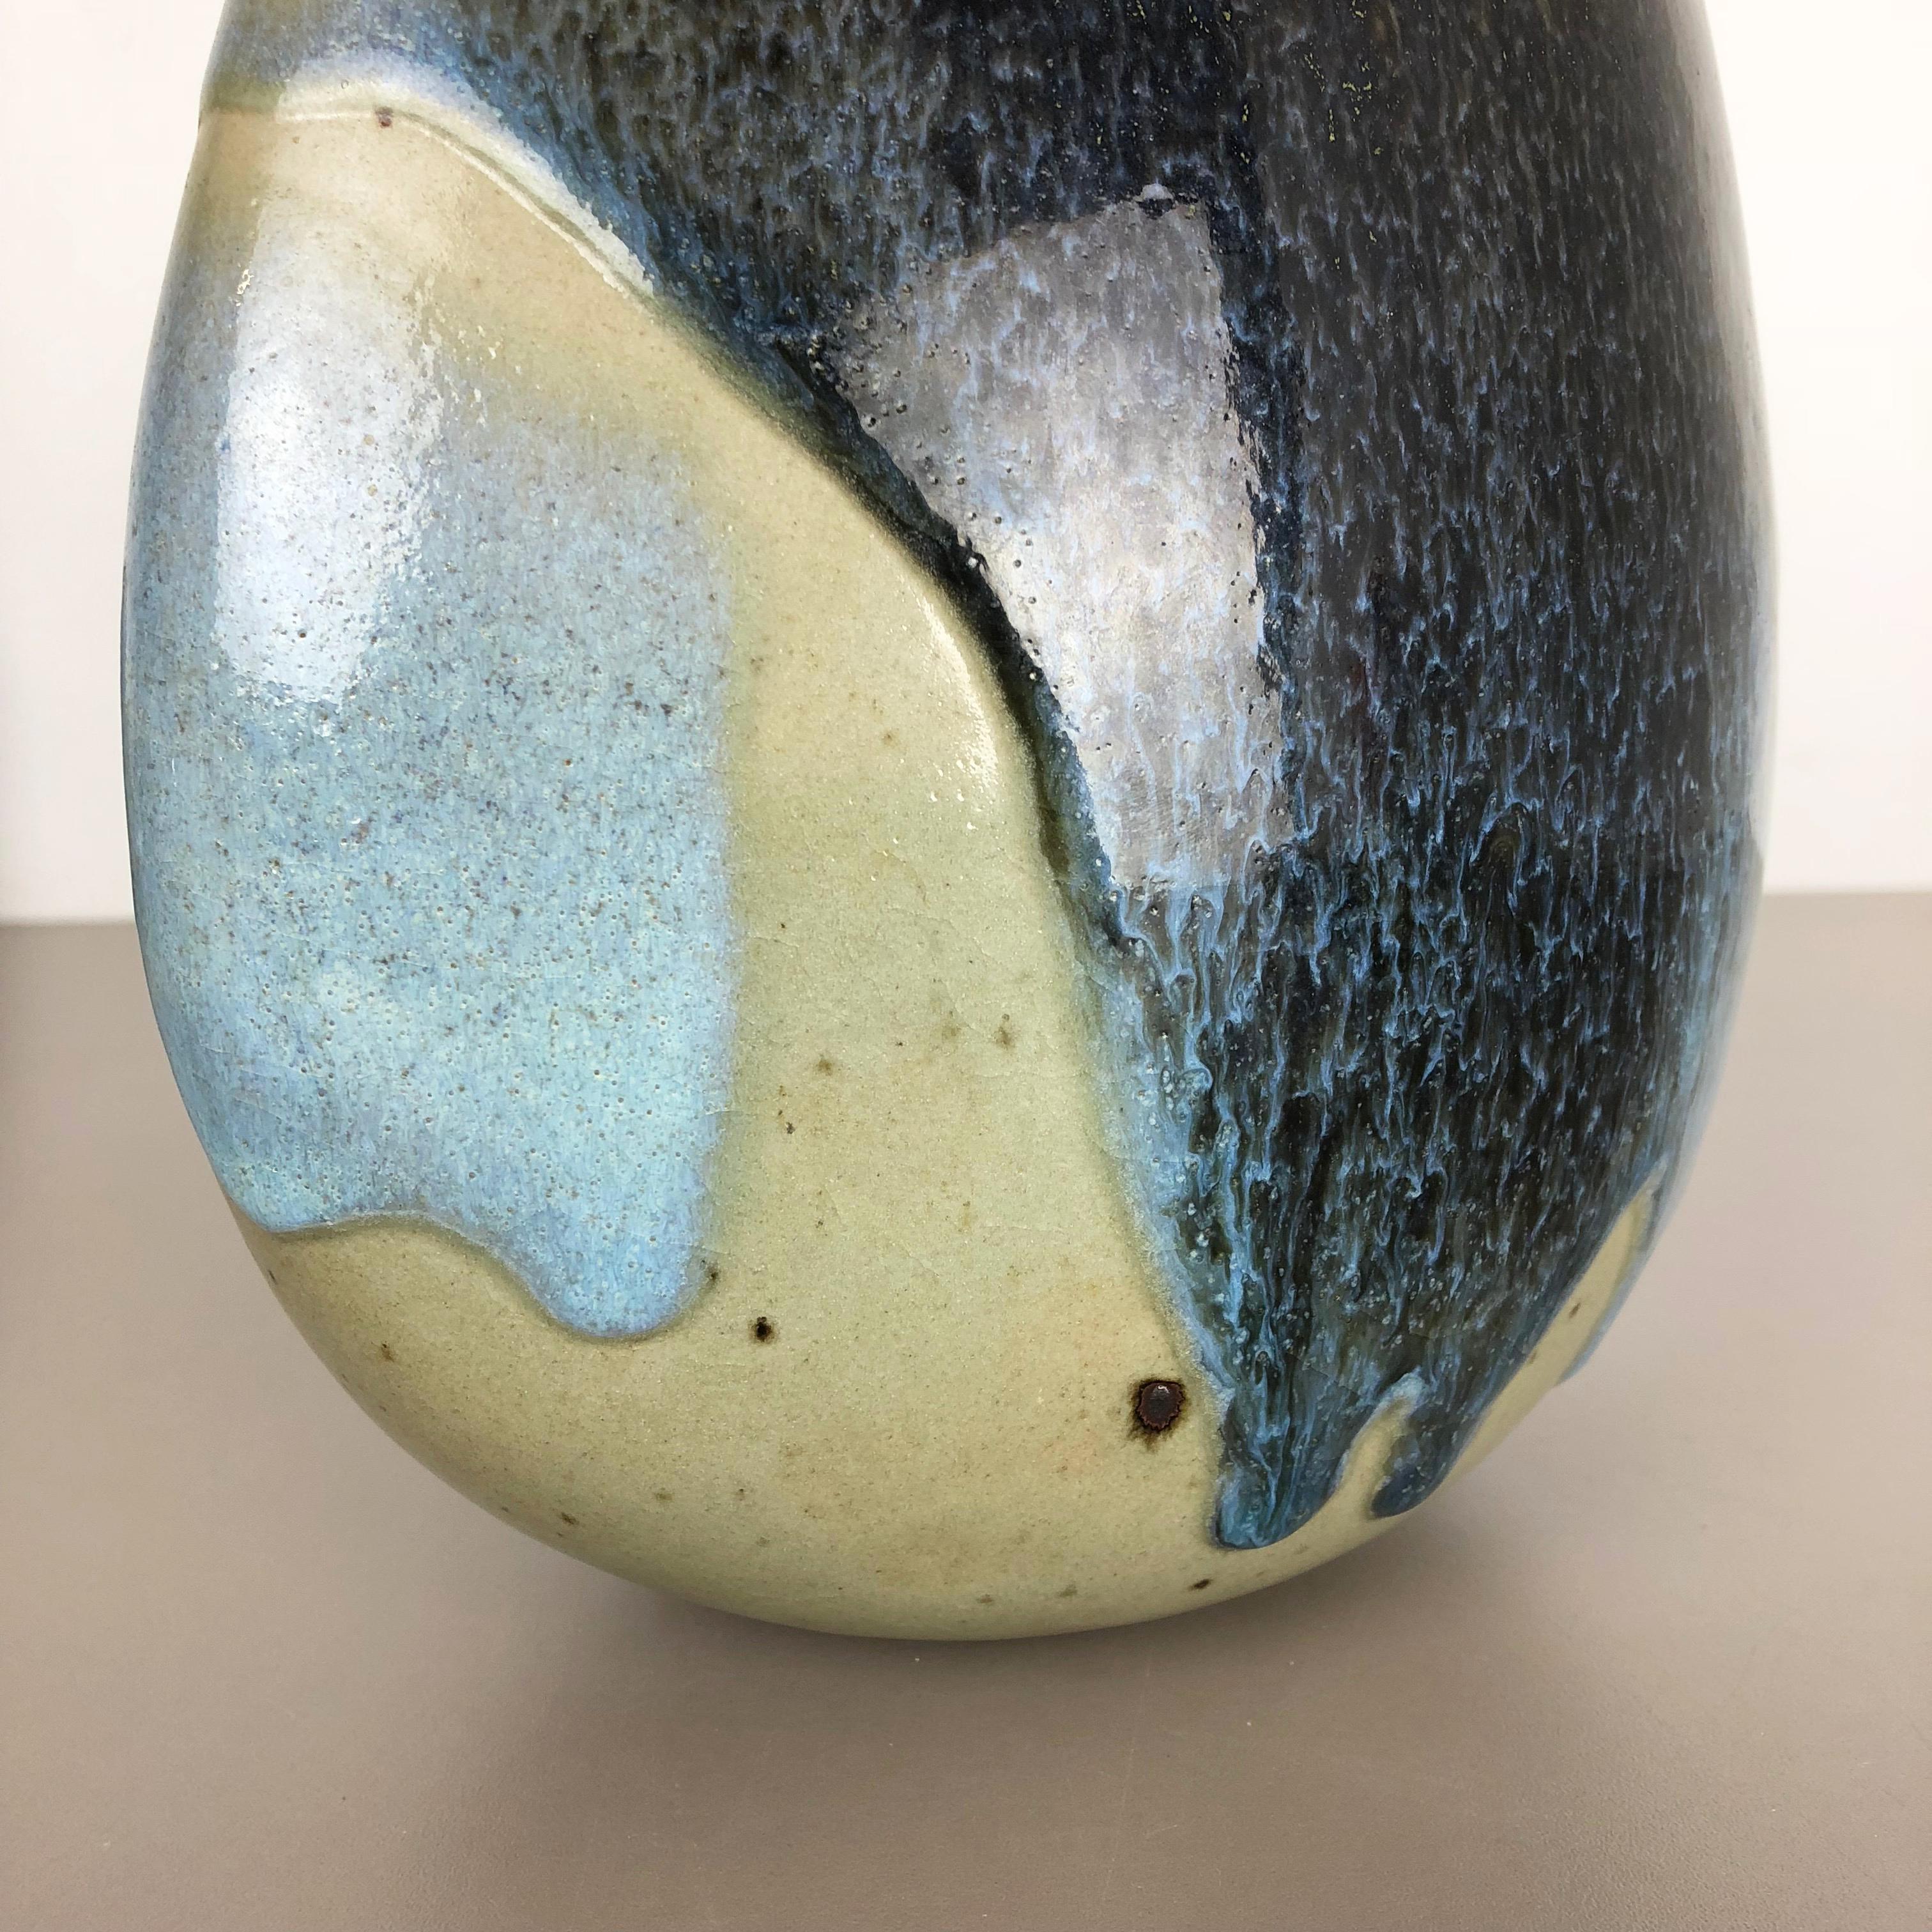 Abstract Ceramic Studio Stoneware Vase by Gotlind Weigel, Germany, 1960s For Sale 10